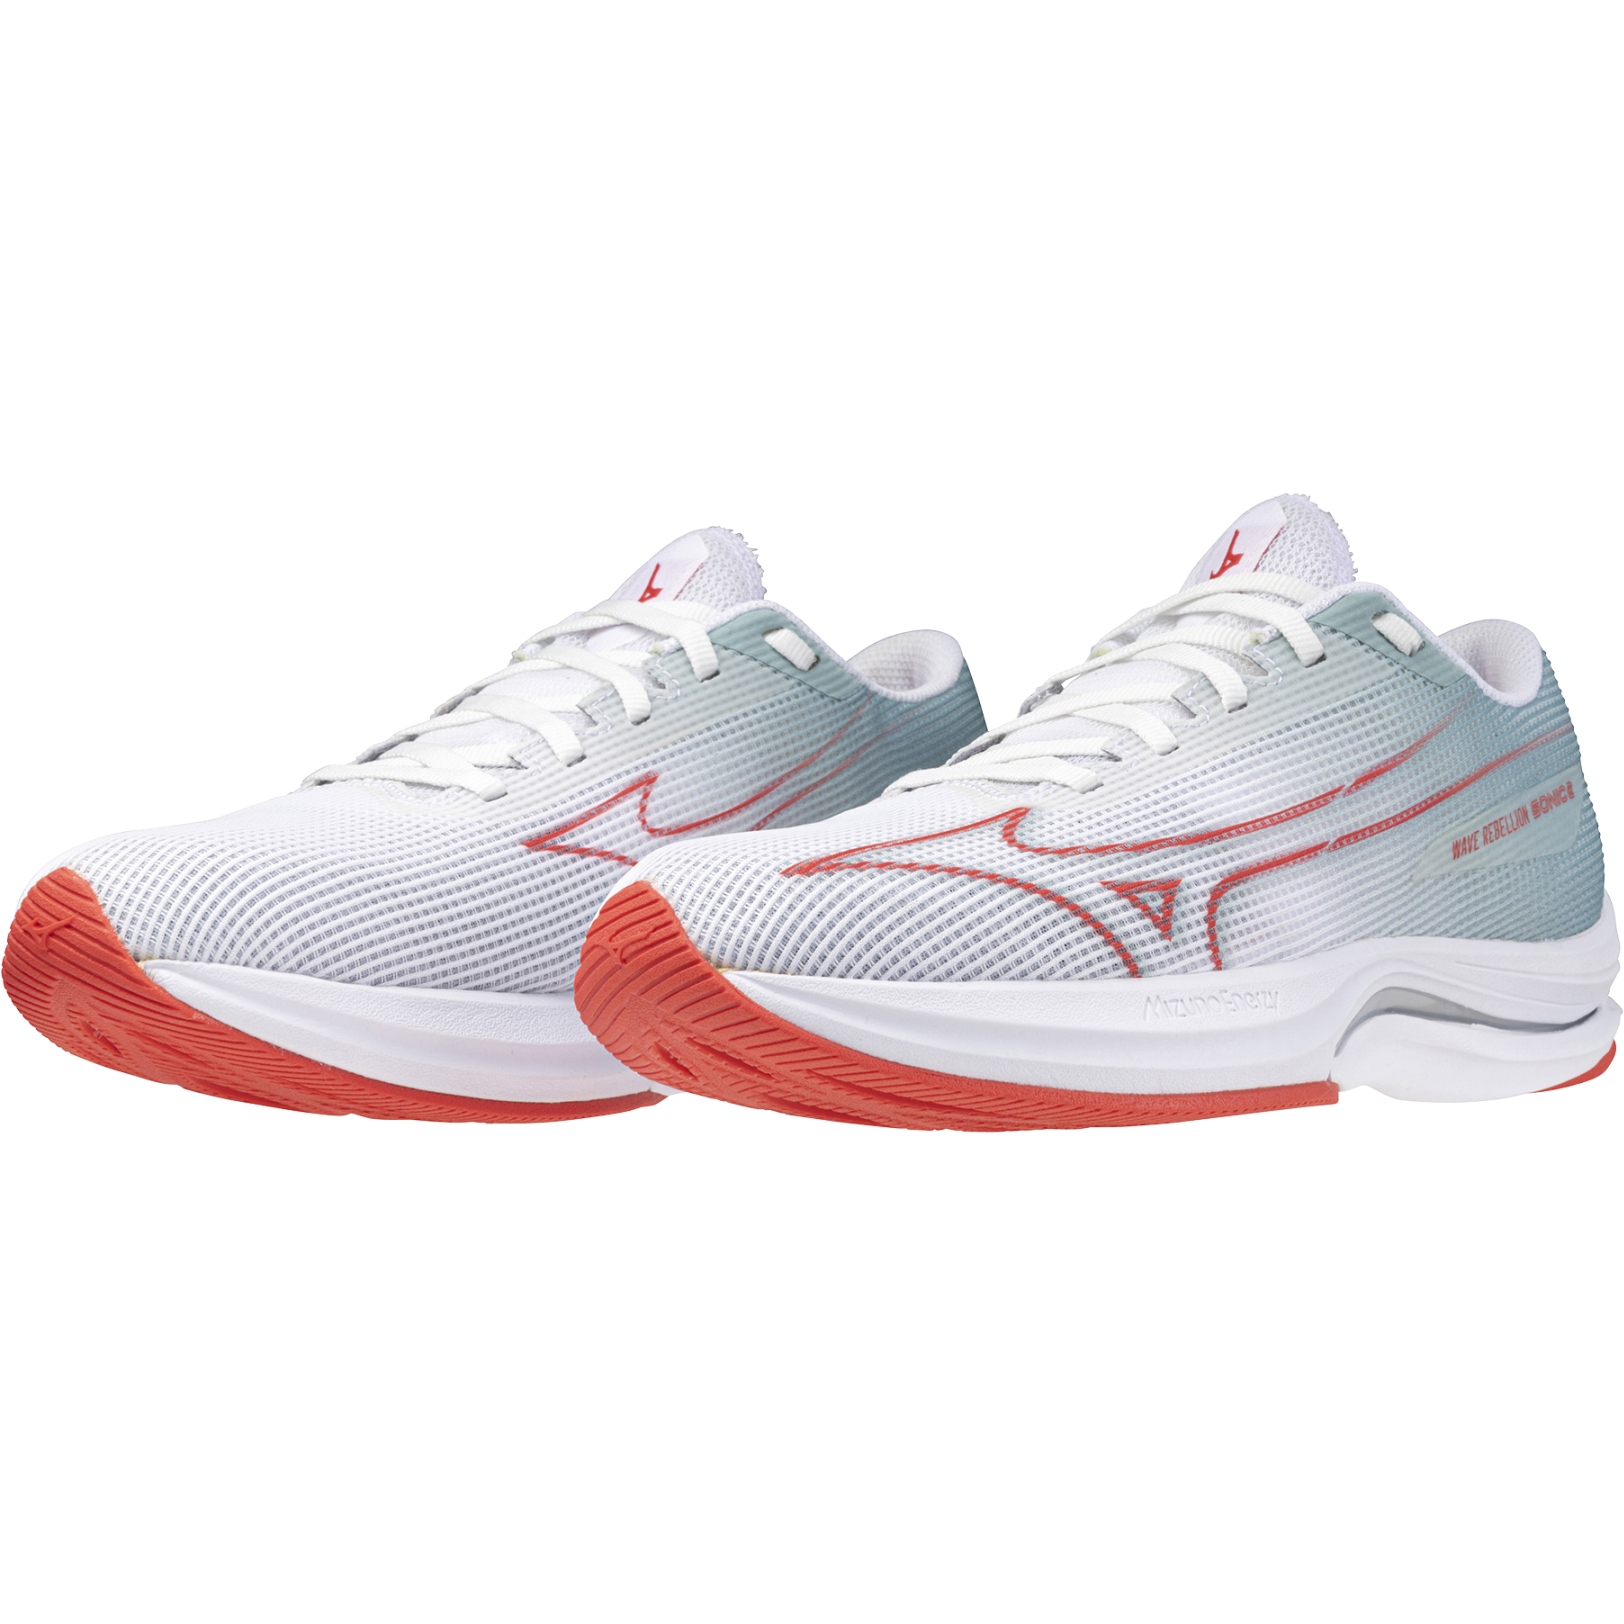 Picture of Mizuno Wave Rebellion Sonic 2 Running Shoes Women - White / Cayenne / Gray Mist